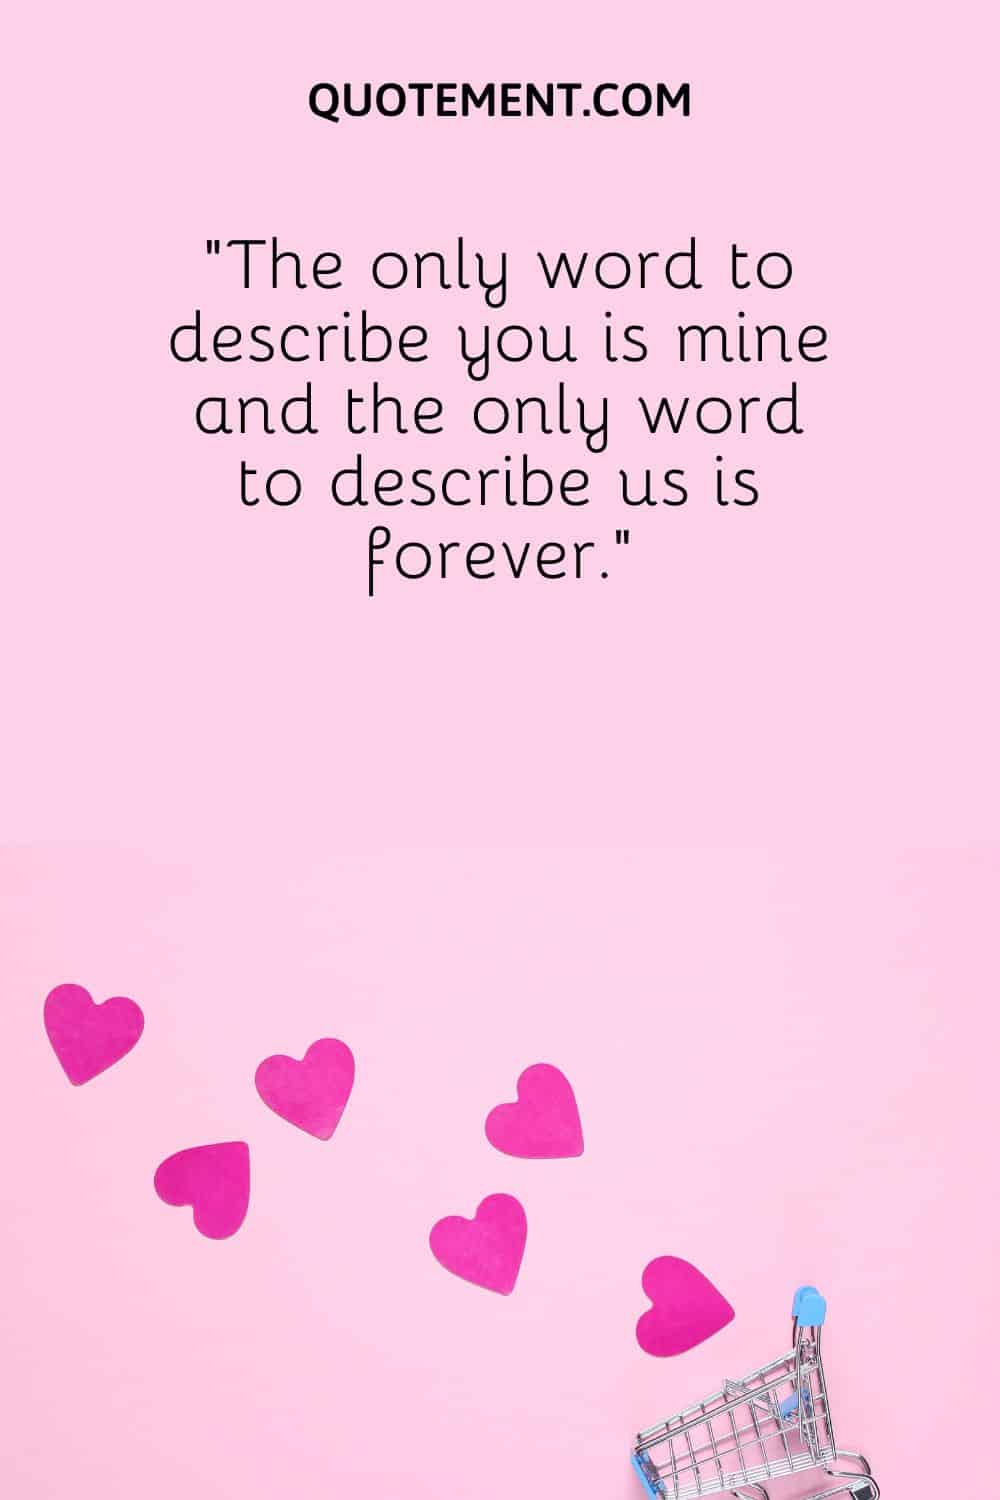 “The only word to describe you is mine and the only word to describe us is forever.”